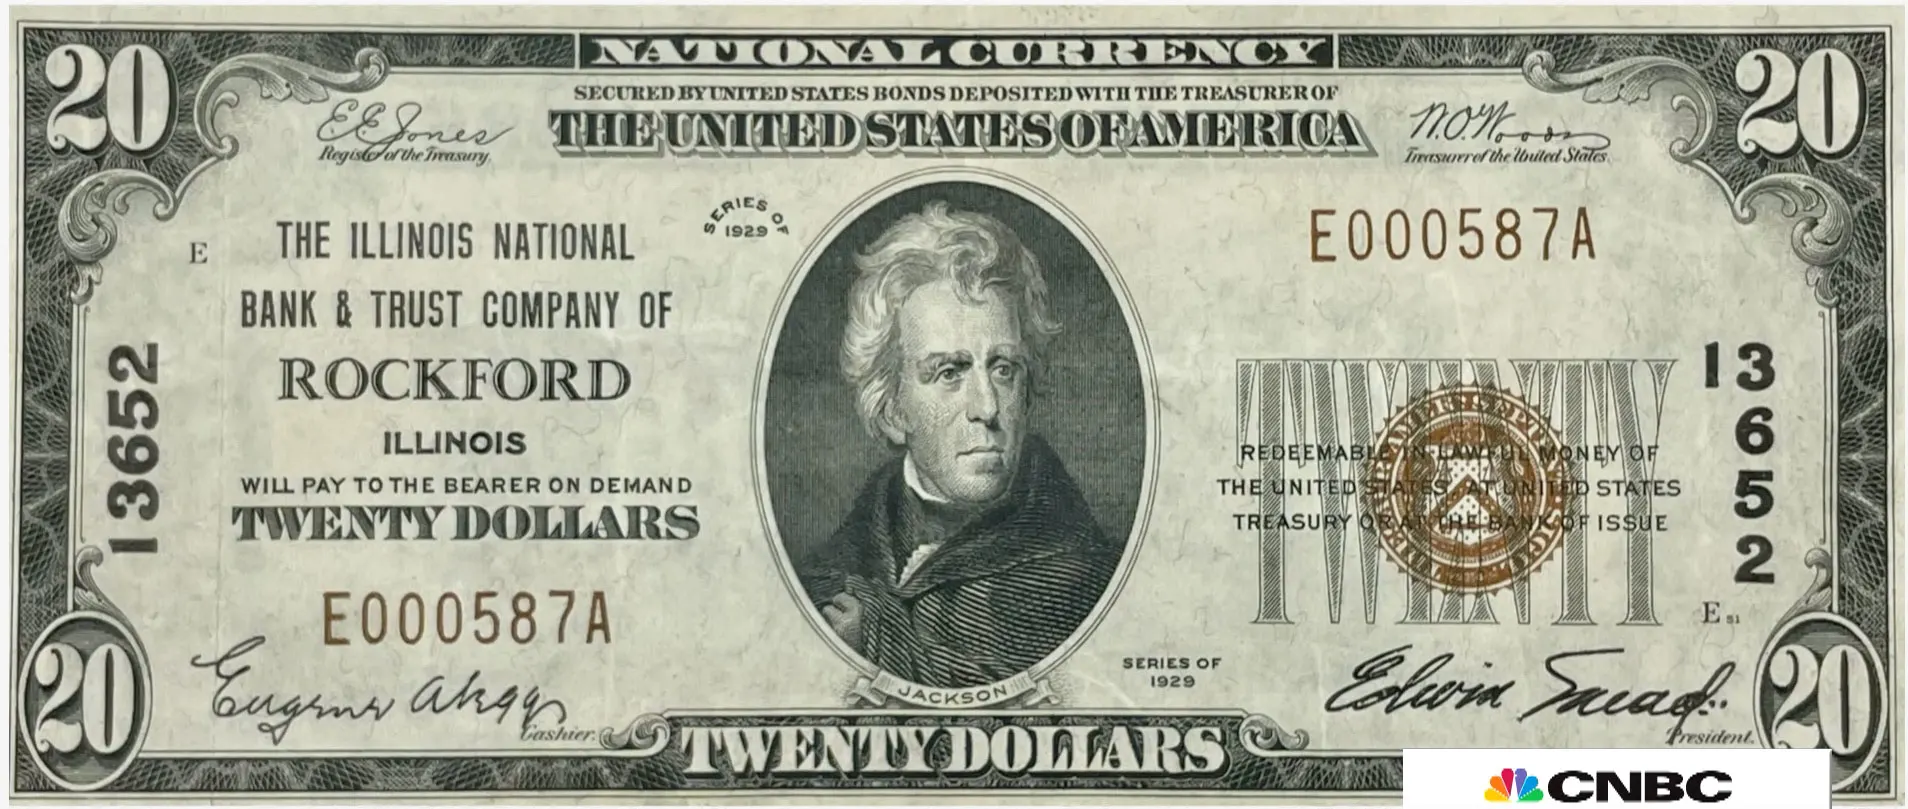 An old 20 dollar bill shown during Berkshire Hathaway press conference